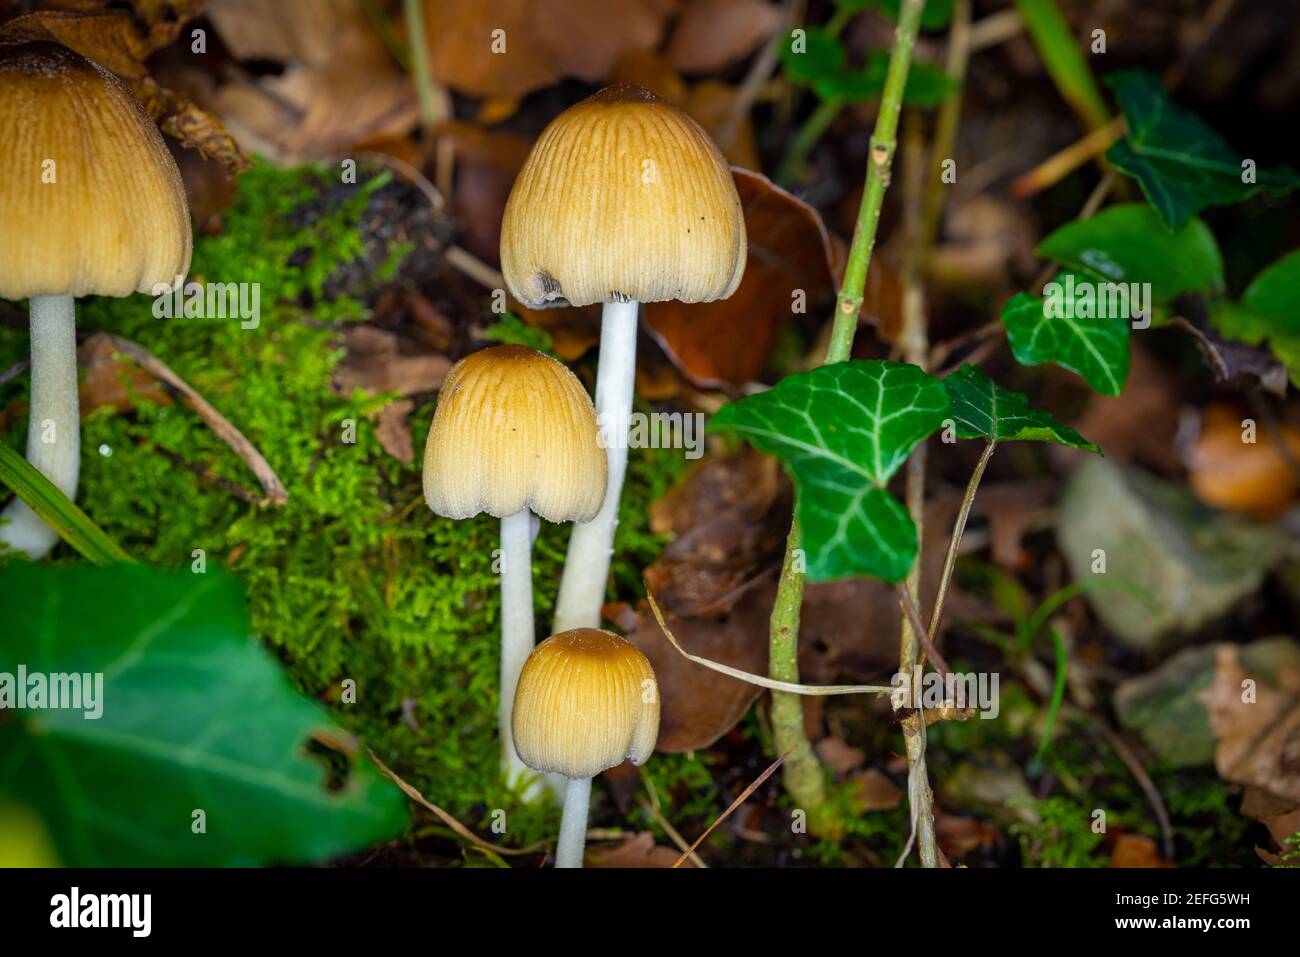 The toxic 'Mica Inkcap' or the 'Glistening Inkcap' Mushroom - Glimmertintling (Coprinellus micaceus) - grows in a forest between moss and leaves - ris Stock Photo